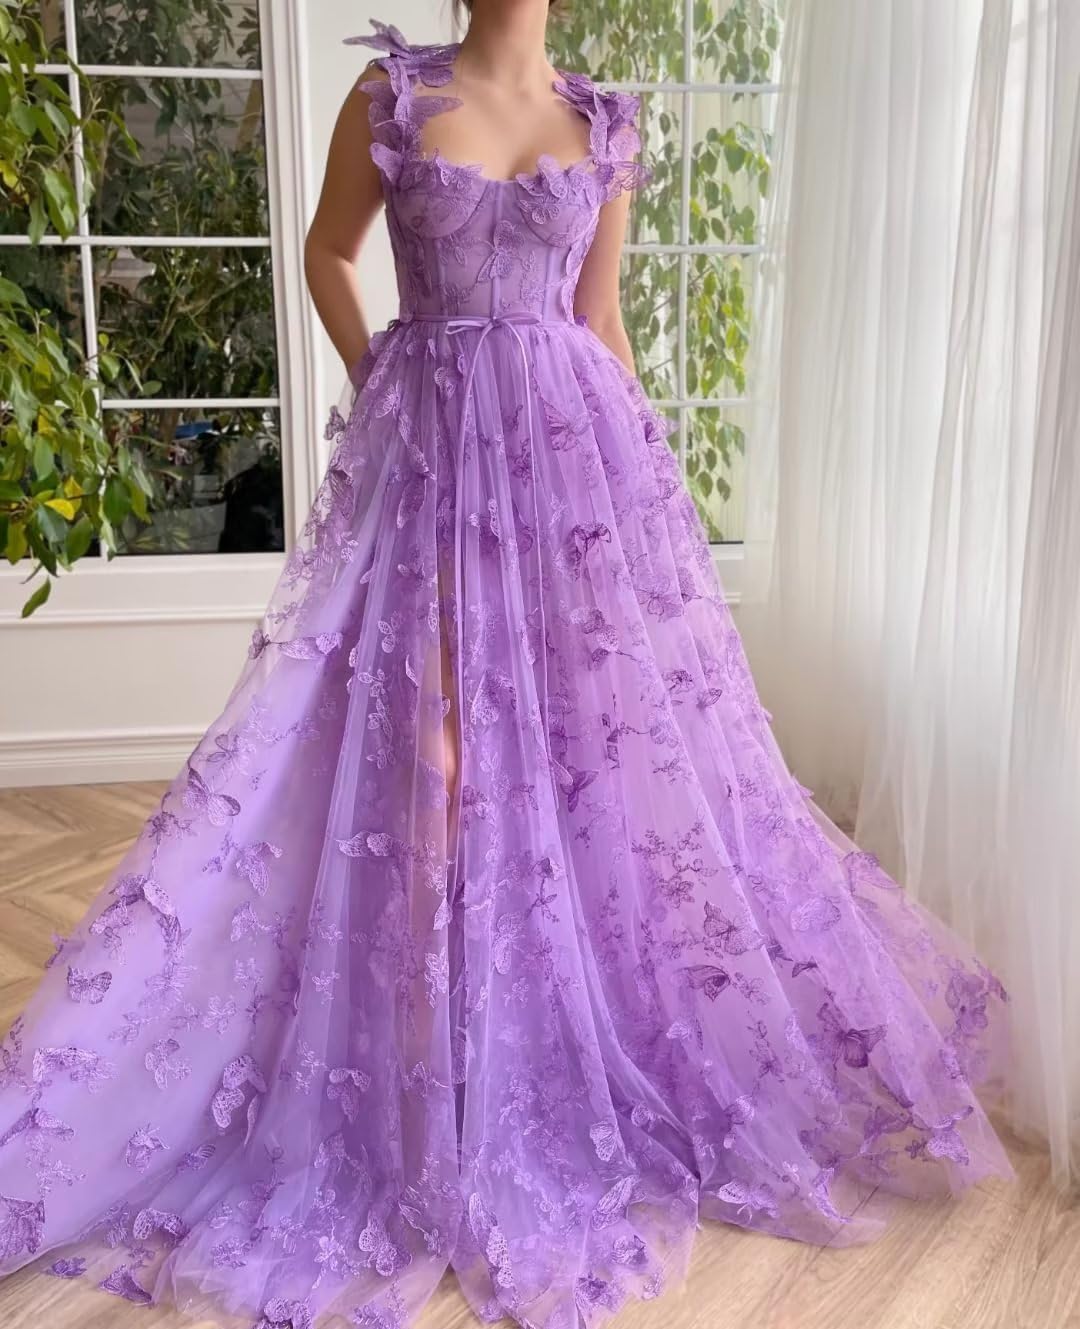 Long Tulle Prom Dress with 3D Butterflies Floor Length Formal Evening Party Gowns for Women Lace Applique